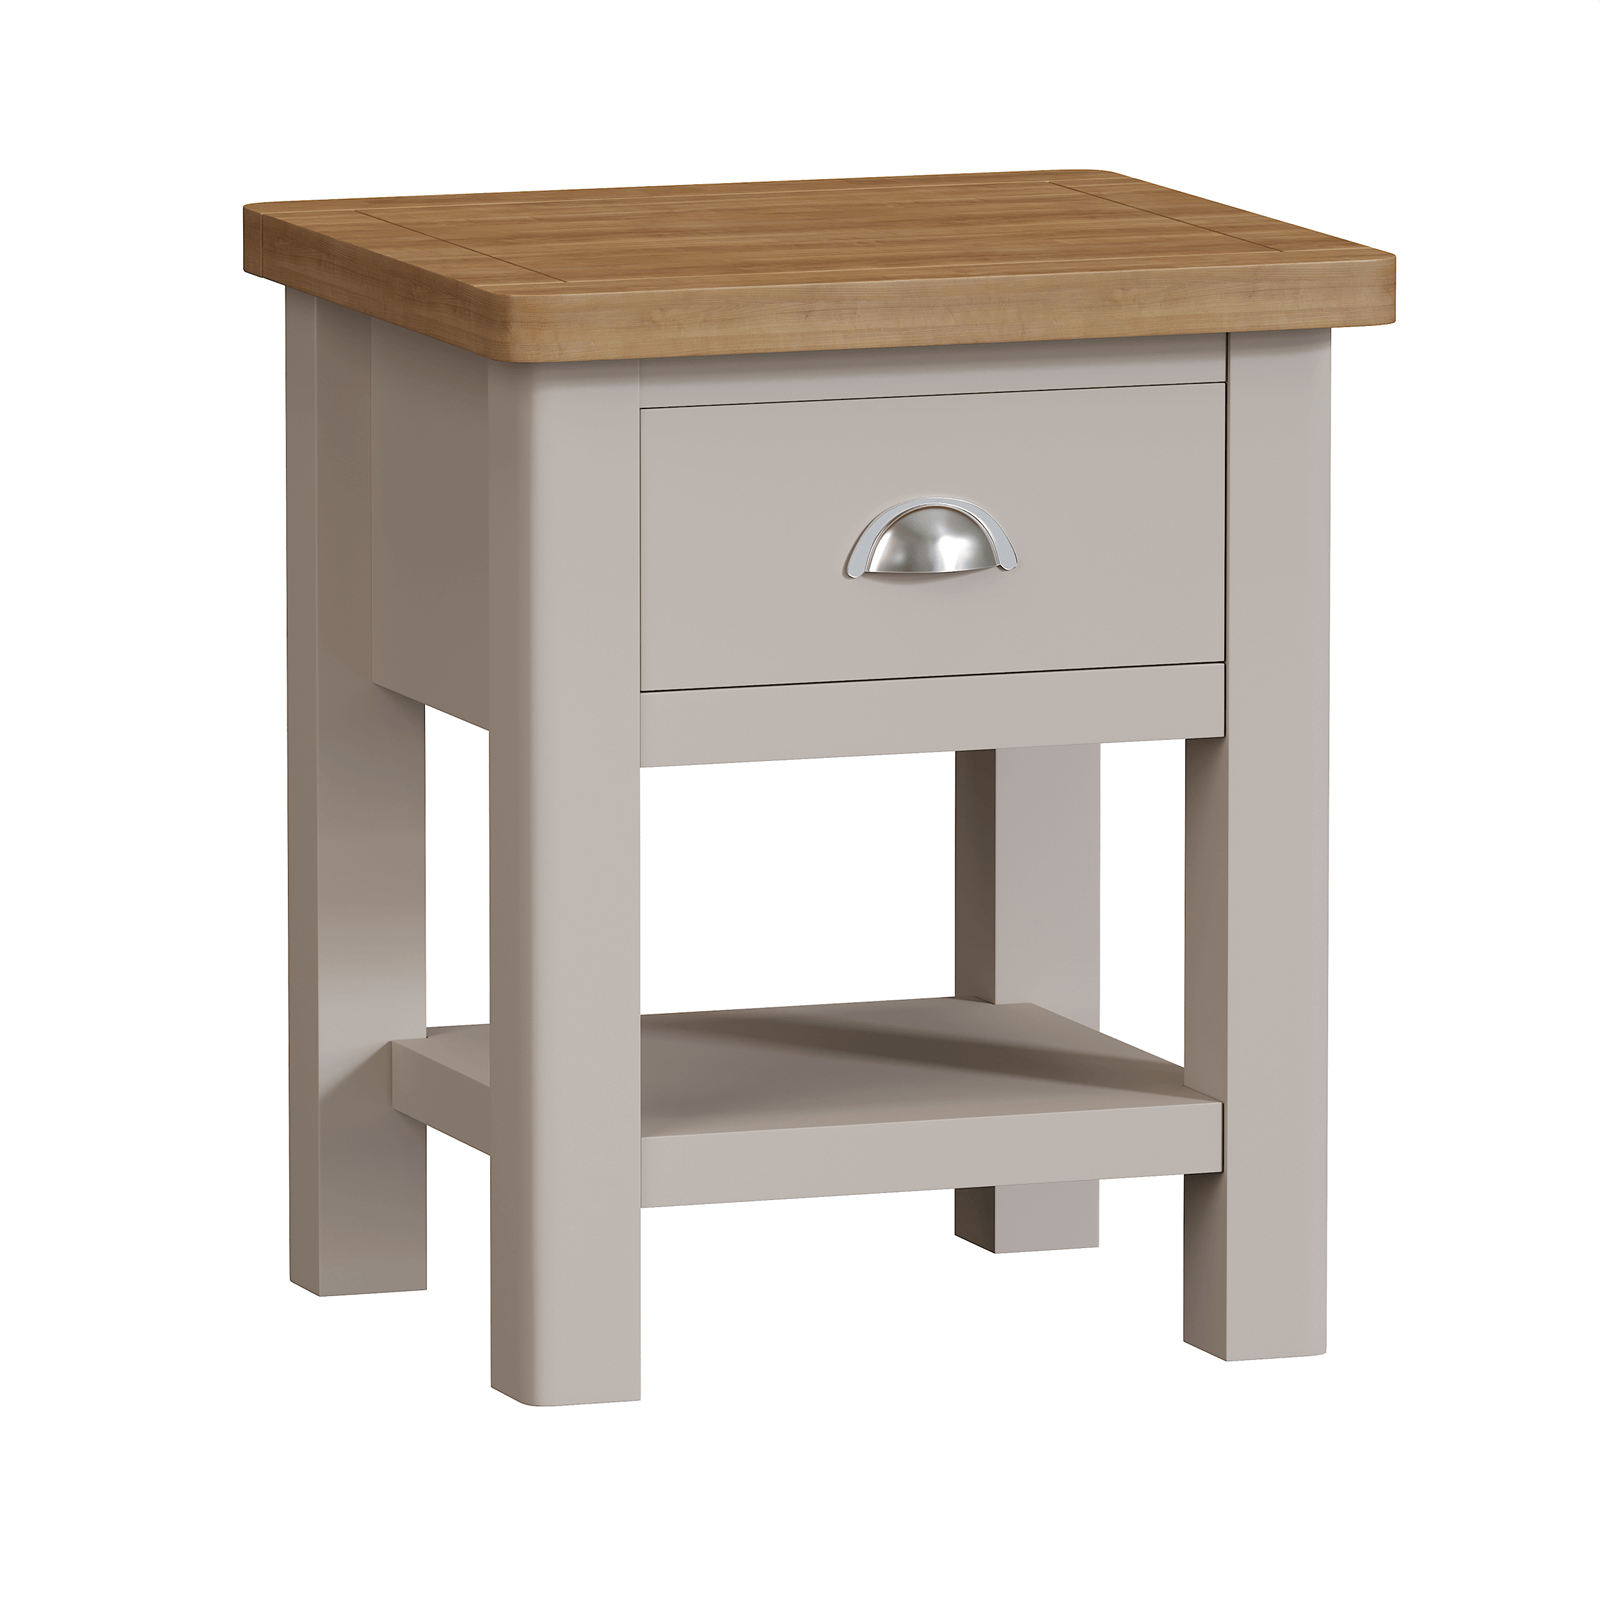 Padstow Lamp Table - Truffle